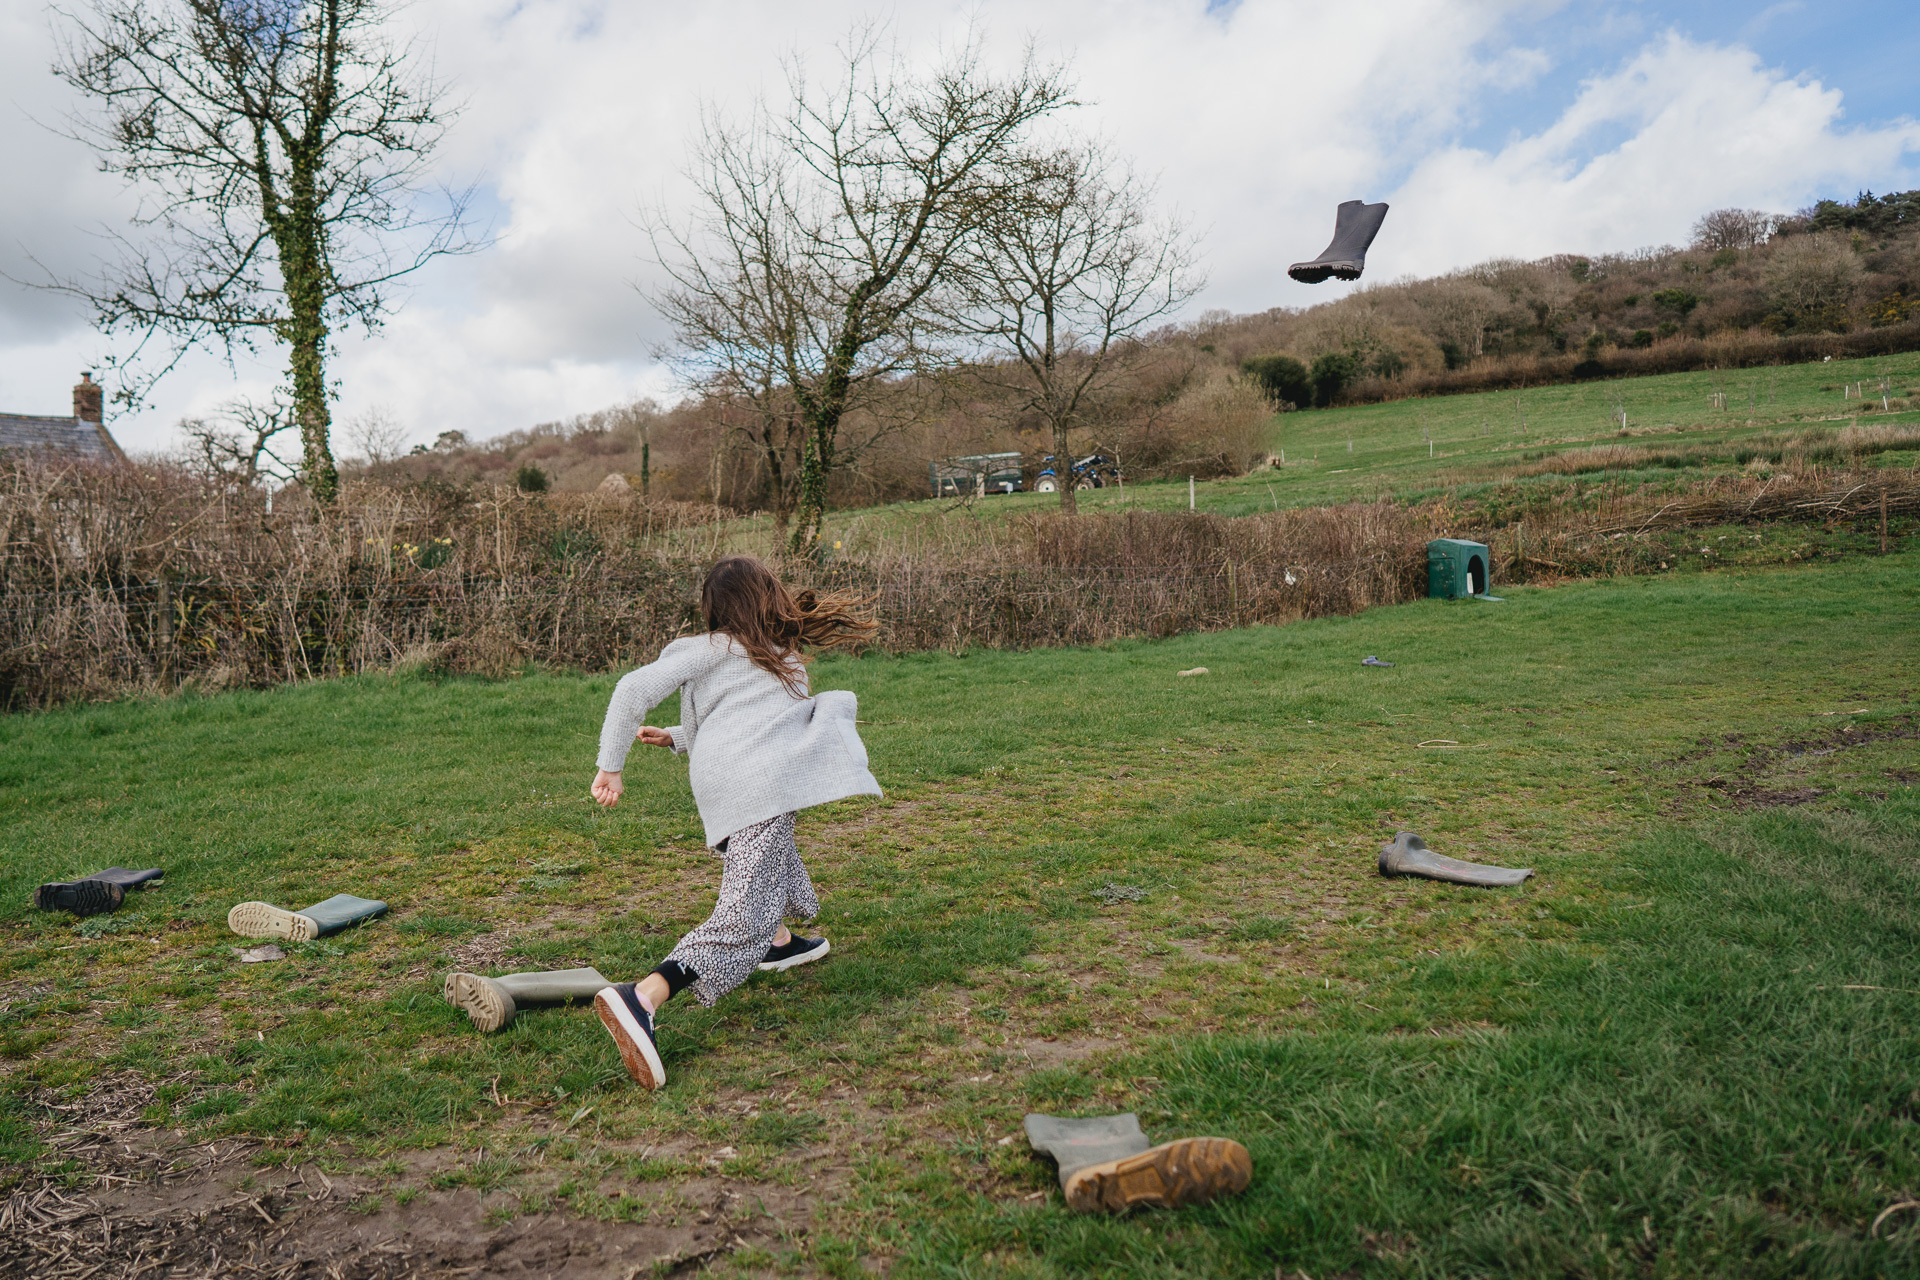 A young girl throwing a welly in a field